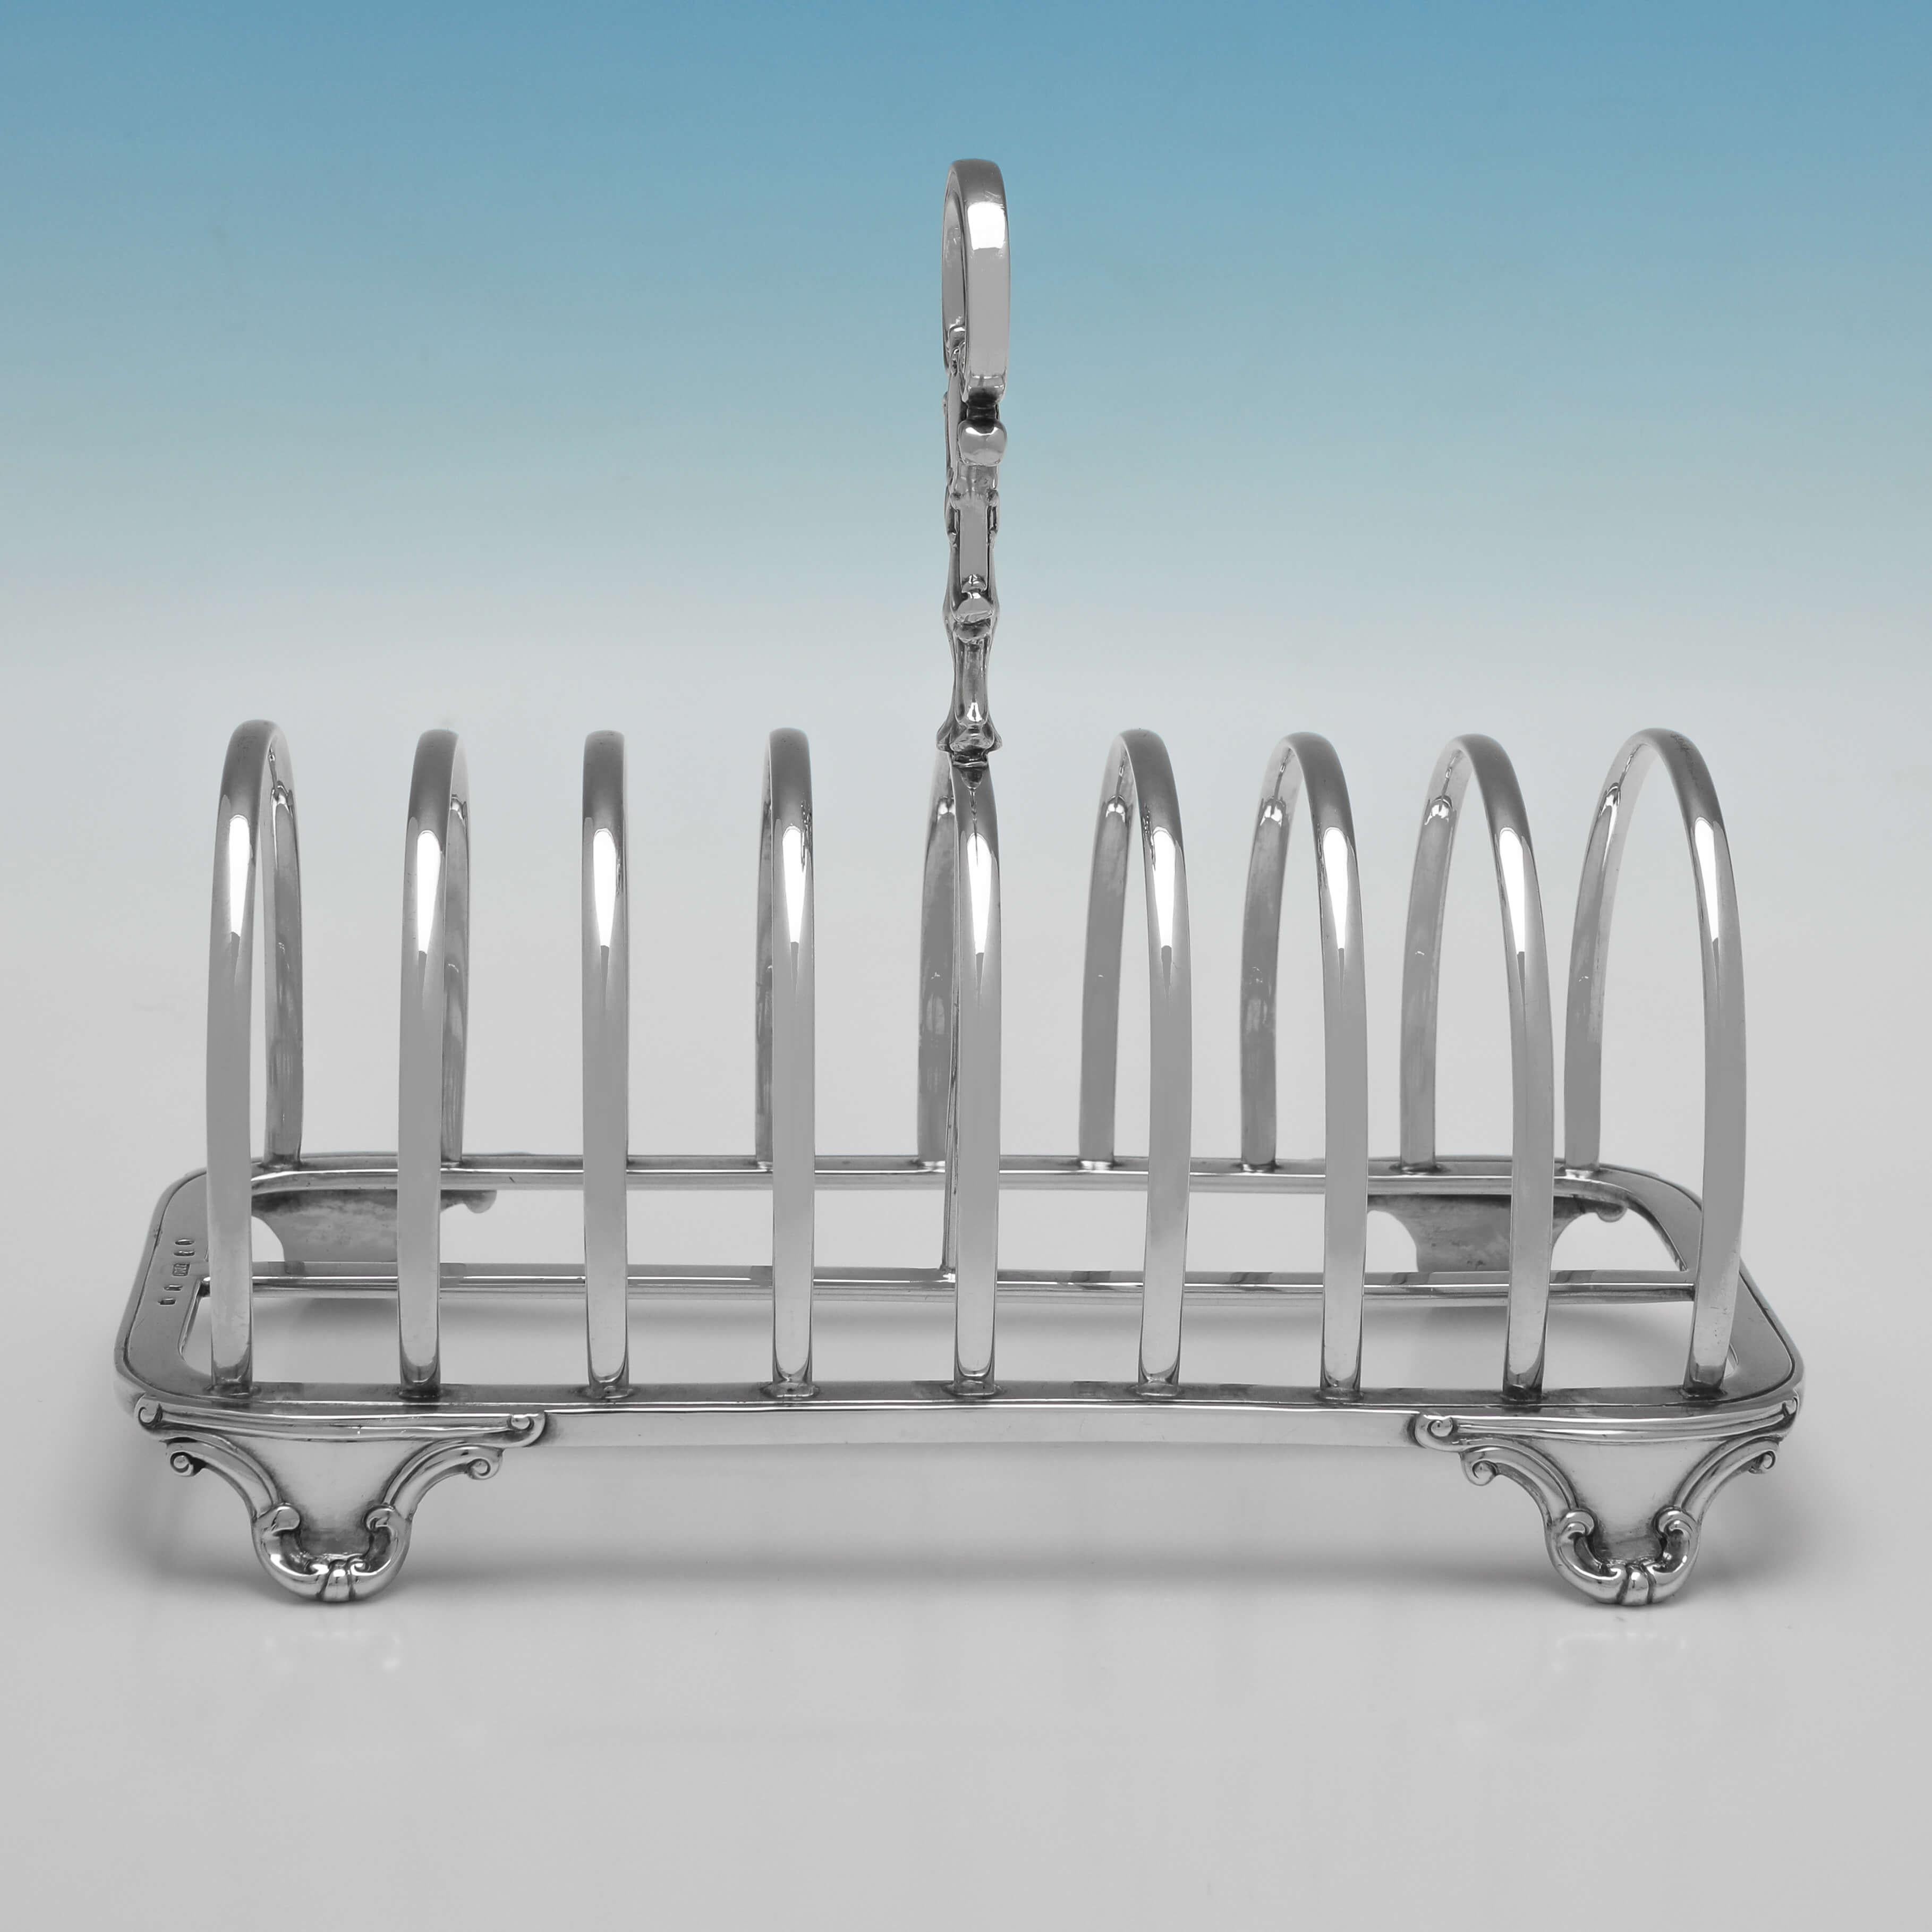 Hallmarked in Edinburgh in 1843 by James McKay, this handsome, Victorian, Antique Sterling Silver Toast Rack, features shaped feet, an ornate handle, and will hold 8 pieces of toast. 

The toast rack measures 6.25